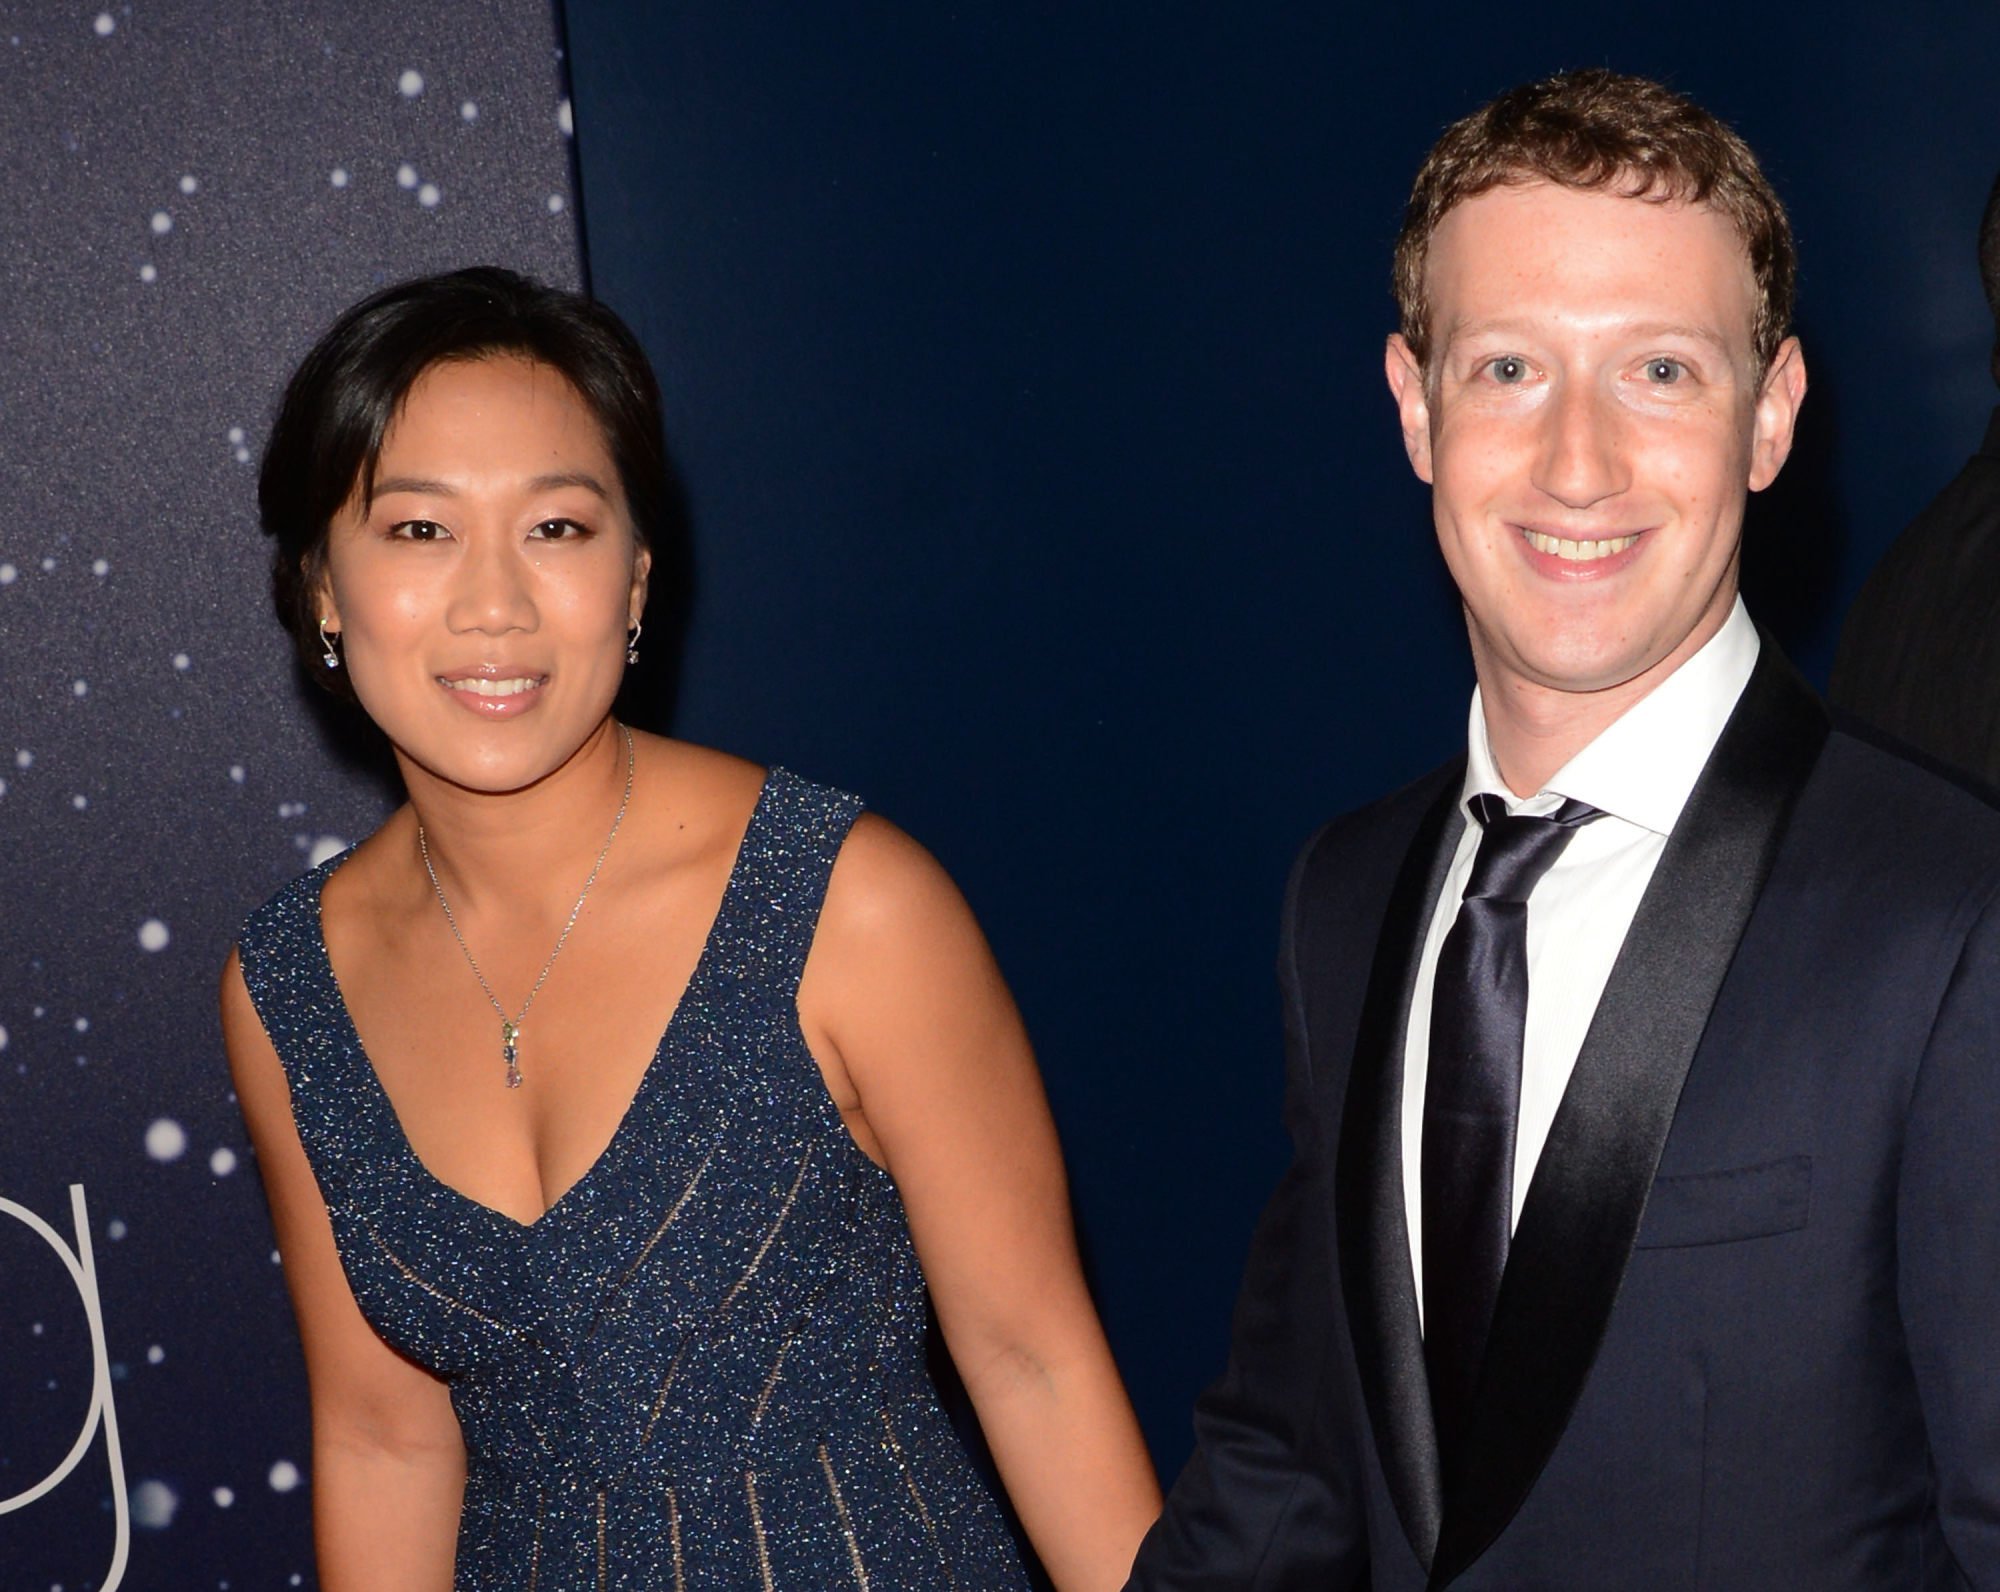 Chan and Zuckerberg in 2014. They were married in 2012. Photo: FilmMagic